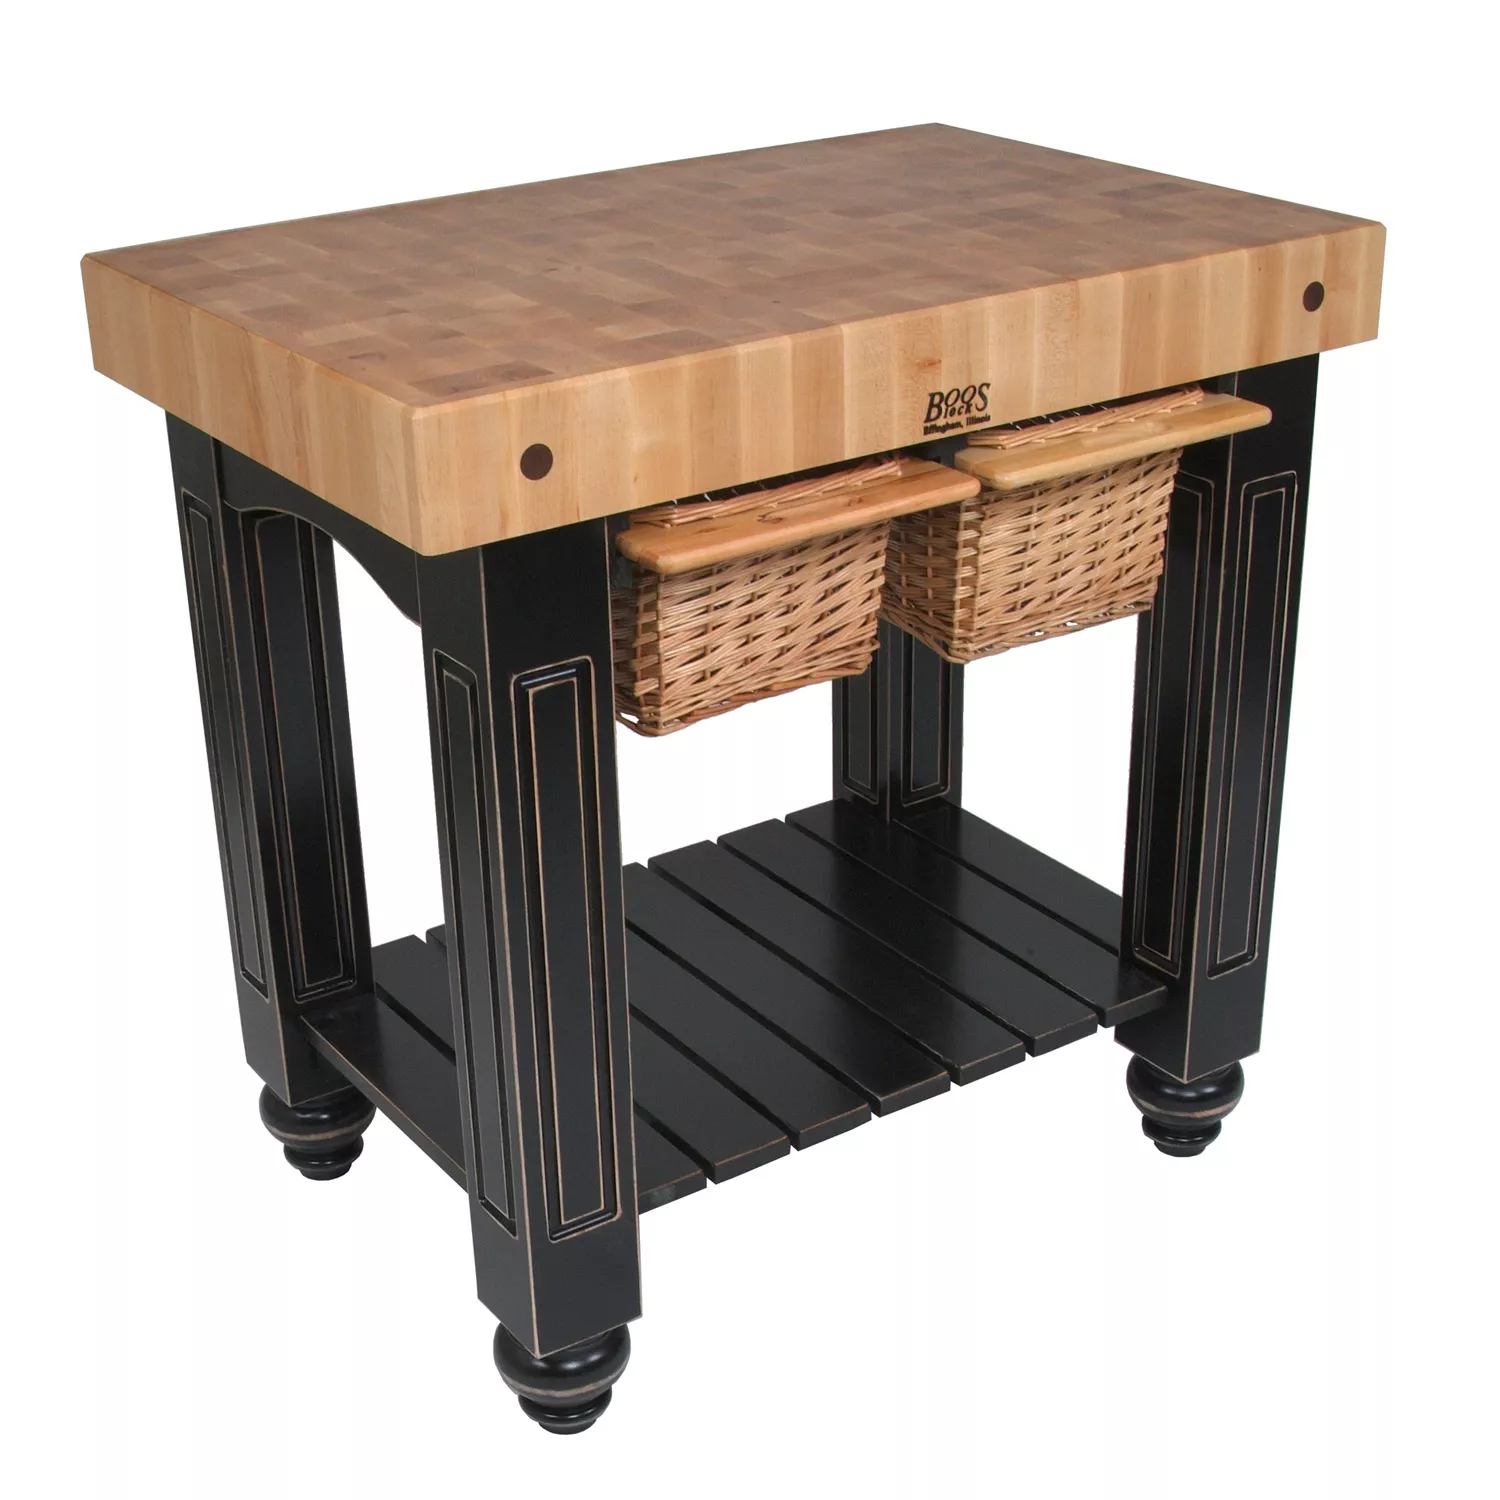 John Boos Maple End Grain 4" Thick Gathering Butcher Block Table with 2 Baskets, 36"x24"x36"